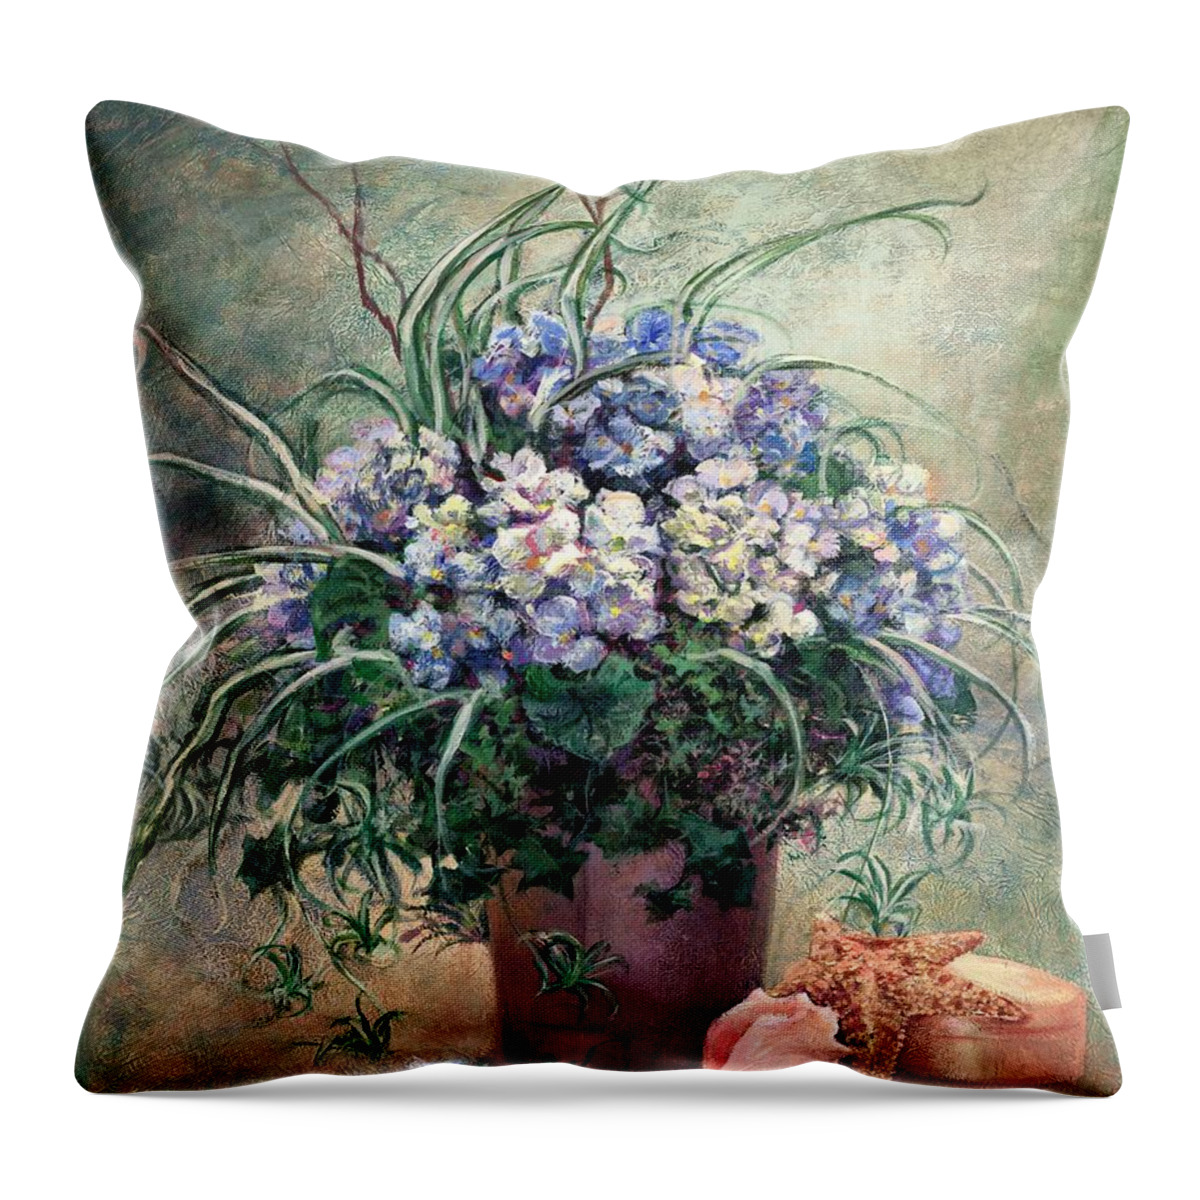 Hydrangeas Sea Shells Throw Pillow featuring the painting Seashore Hydrangeas by Laurie Snow Hein